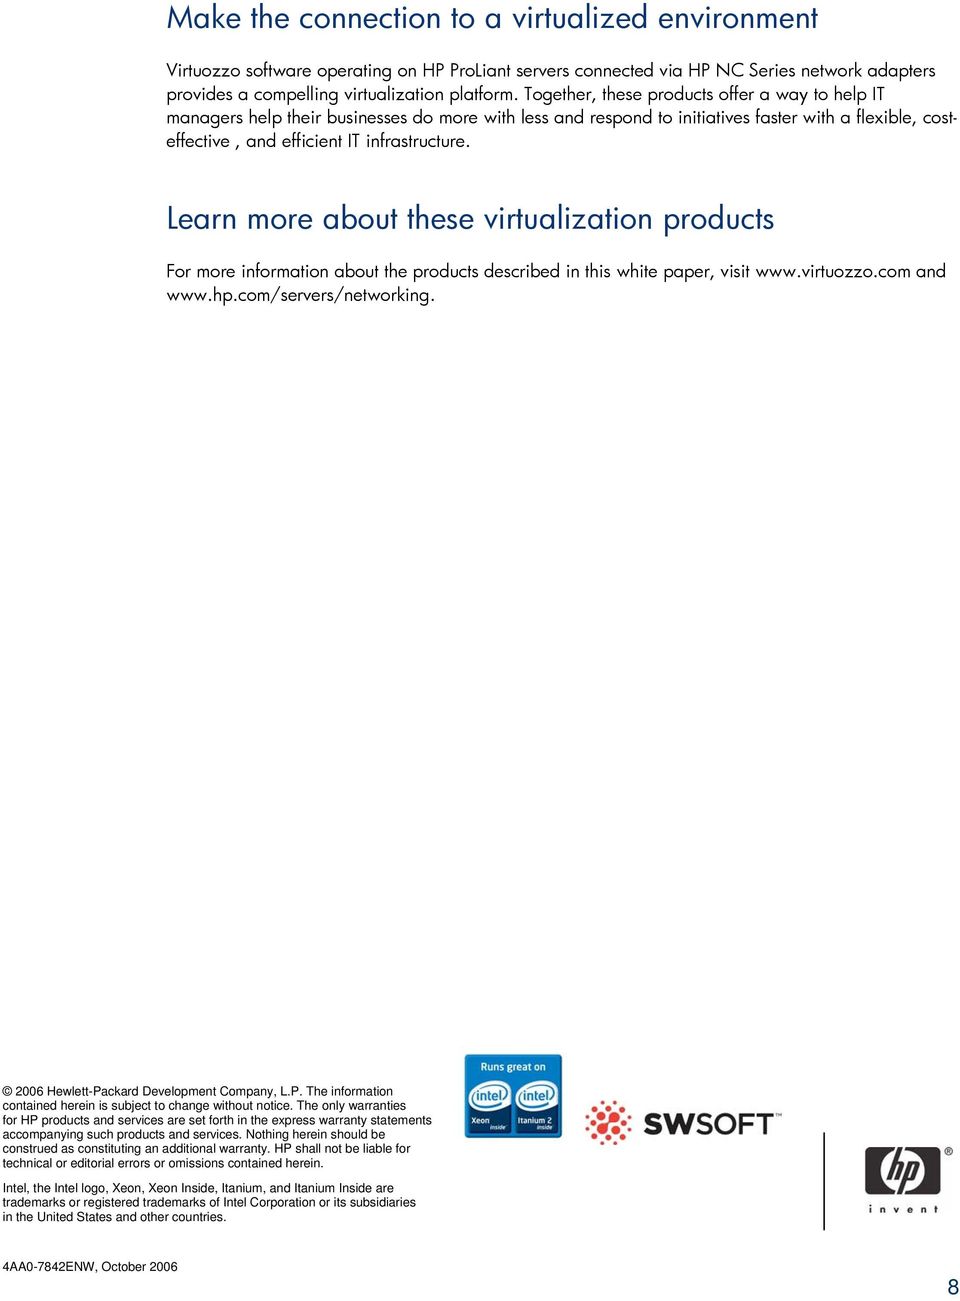 Learn more about these virtualization products For more information about the products described in this white paper, visit www.virtuozzo.com and www.hp.com/servers/networking.